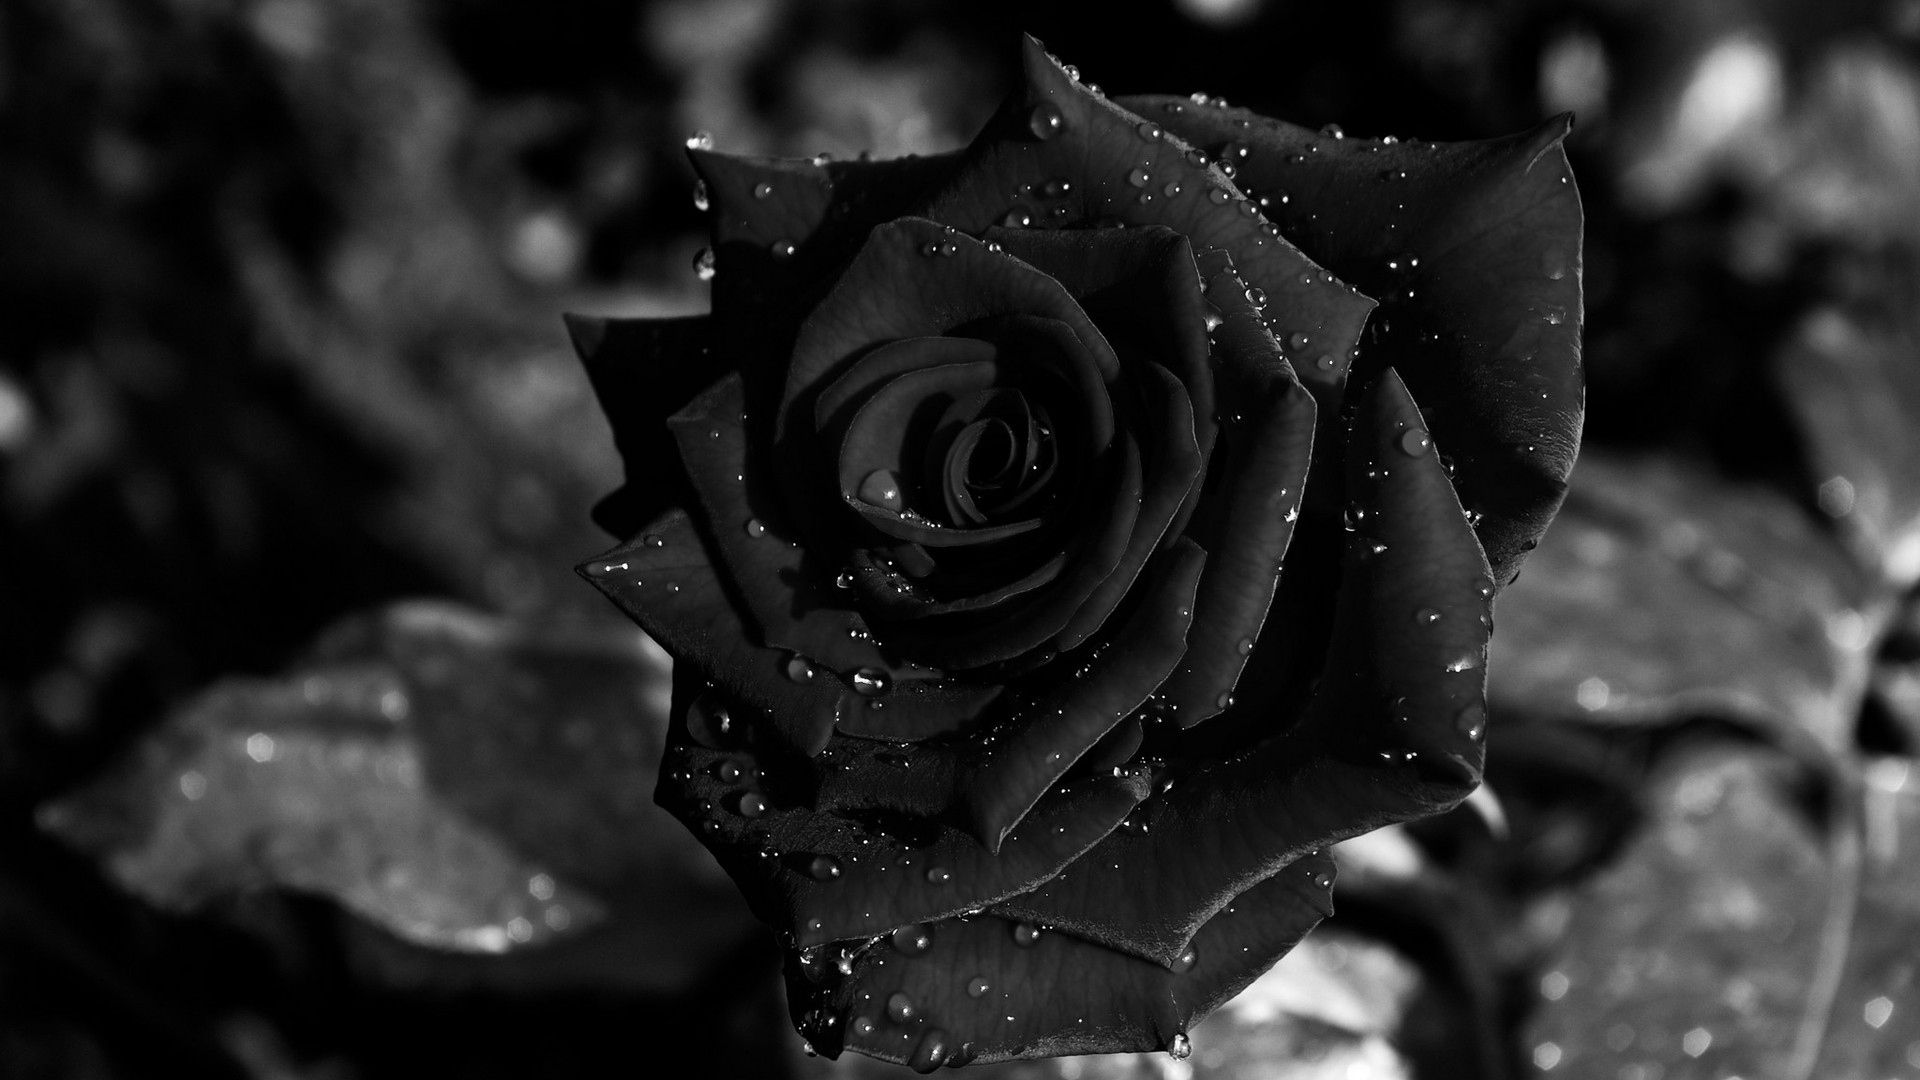 Black Rose HD Wallpapers HD Wallpapers COLOR BLACK Pinterest | HD Wallpapers  | Pinterest | Black roses, Hd wallpaper and Wallpaper